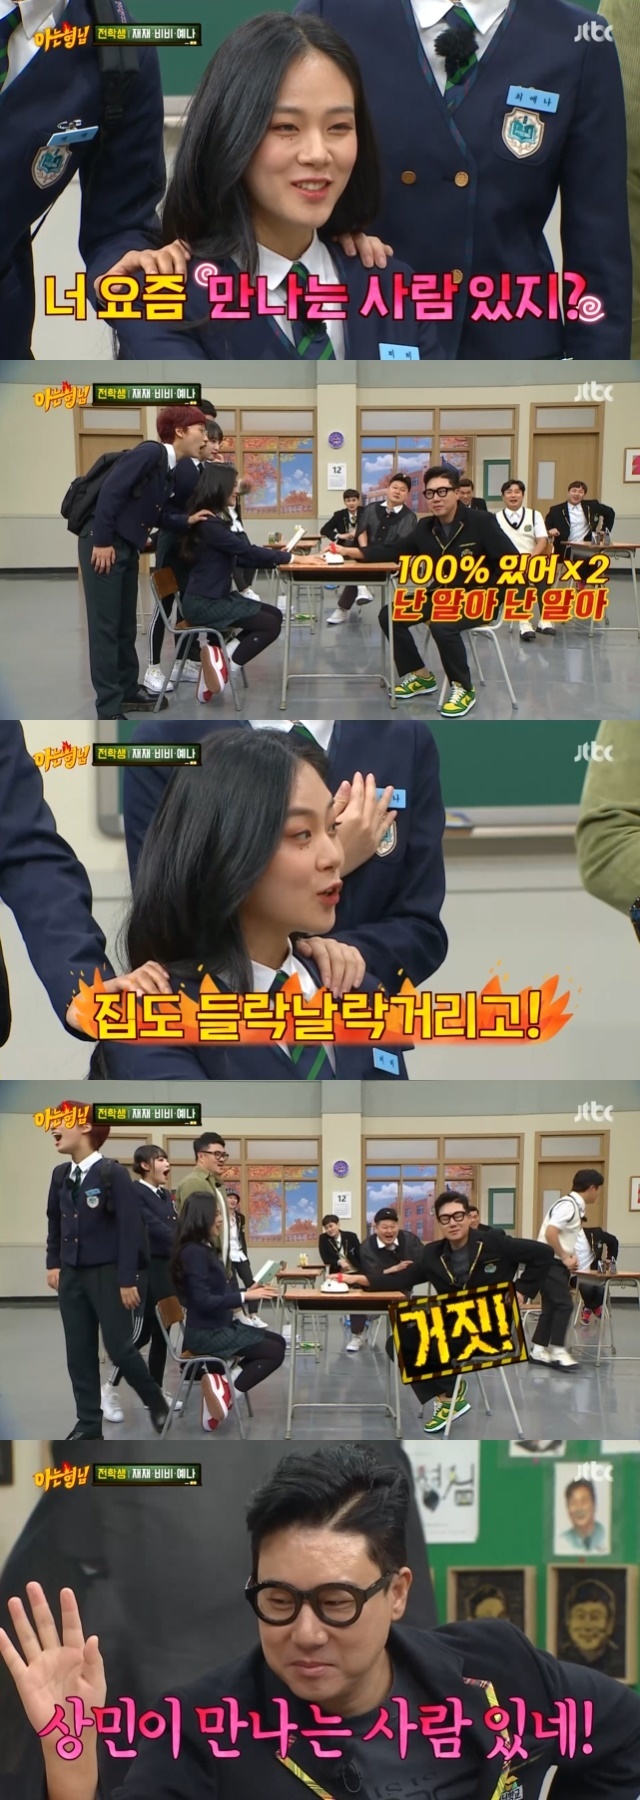 Lee Sang-min insisted that there is no one to meet at present, but the lie detector focused attention on the answer yes.In the 311th episode of the JTBC entertainment program Knowing Bros (hereinafter referred to as Knowing Bros), which aired on December 18, Jaejae, Bibi and Choi Ye-na from Girls Query Ban 2 appeared as former students.On this day, Jaejae, Viv, and Choi Ye-na took out a lie detector and checked the integrity of their brothers, who said in Lee Sang-mins order: Youve met someone these days?With Lee Sang-min causing a pupil earthquake, Lee Soo-geun said: There is 100 per cent, I know.If you do not tell me this, it is a real trash, and Bibi added, The house goes in and out on the condition of the person you meet.Lee Sang-min said no despite all the drives but the lie detector made a false decision.Kang Ho-dong and his brothers laughed at Lee Sang-mins wedding ceremony.Lee Sang-min said, I said I was at this age.